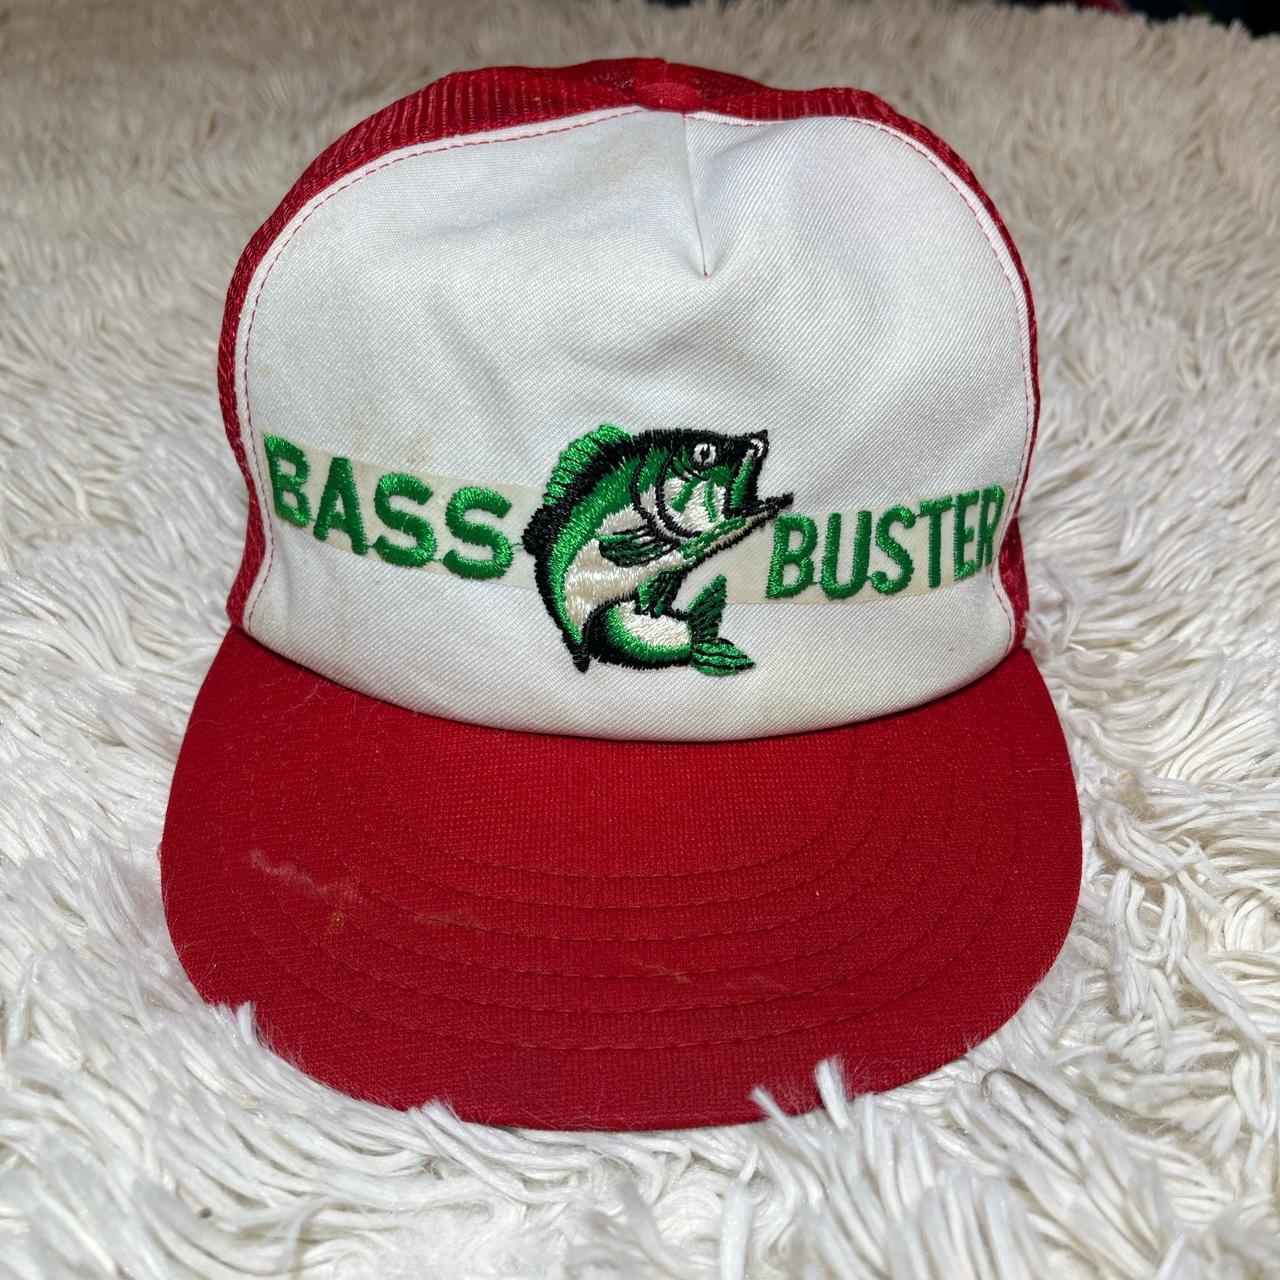 Vintage “Bass Buster” Fishing Hat Trucker Snapback Cap Made in USA